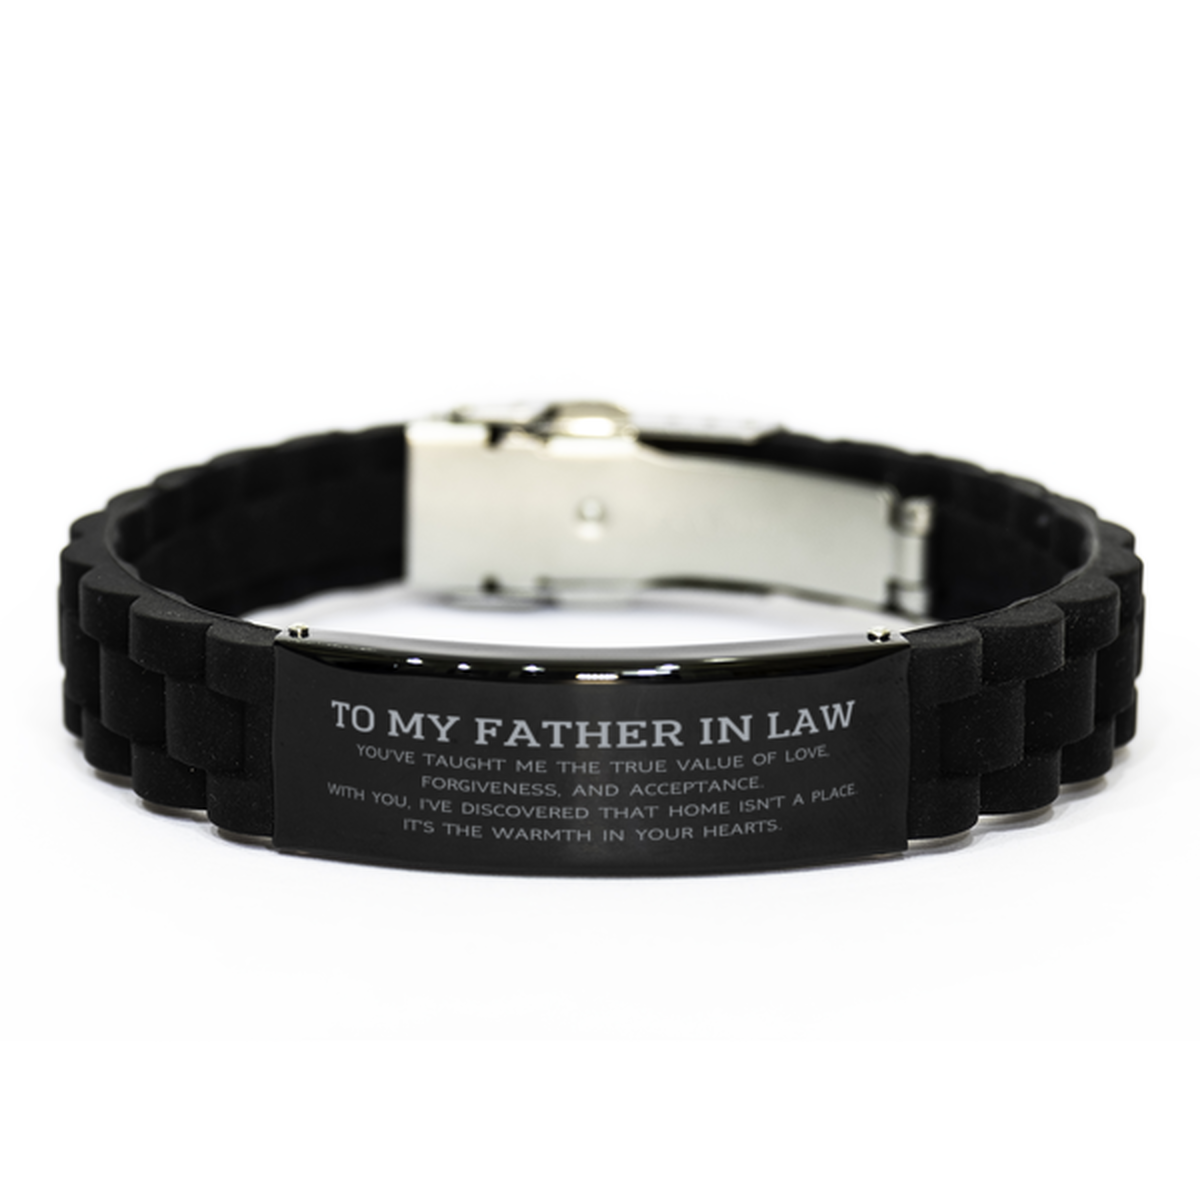 To My Father In Law Gifts, You've taught me the true value of love, Thank You Gifts For Father In Law, Birthday Black Glidelock Clasp Bracelet For Father In Law